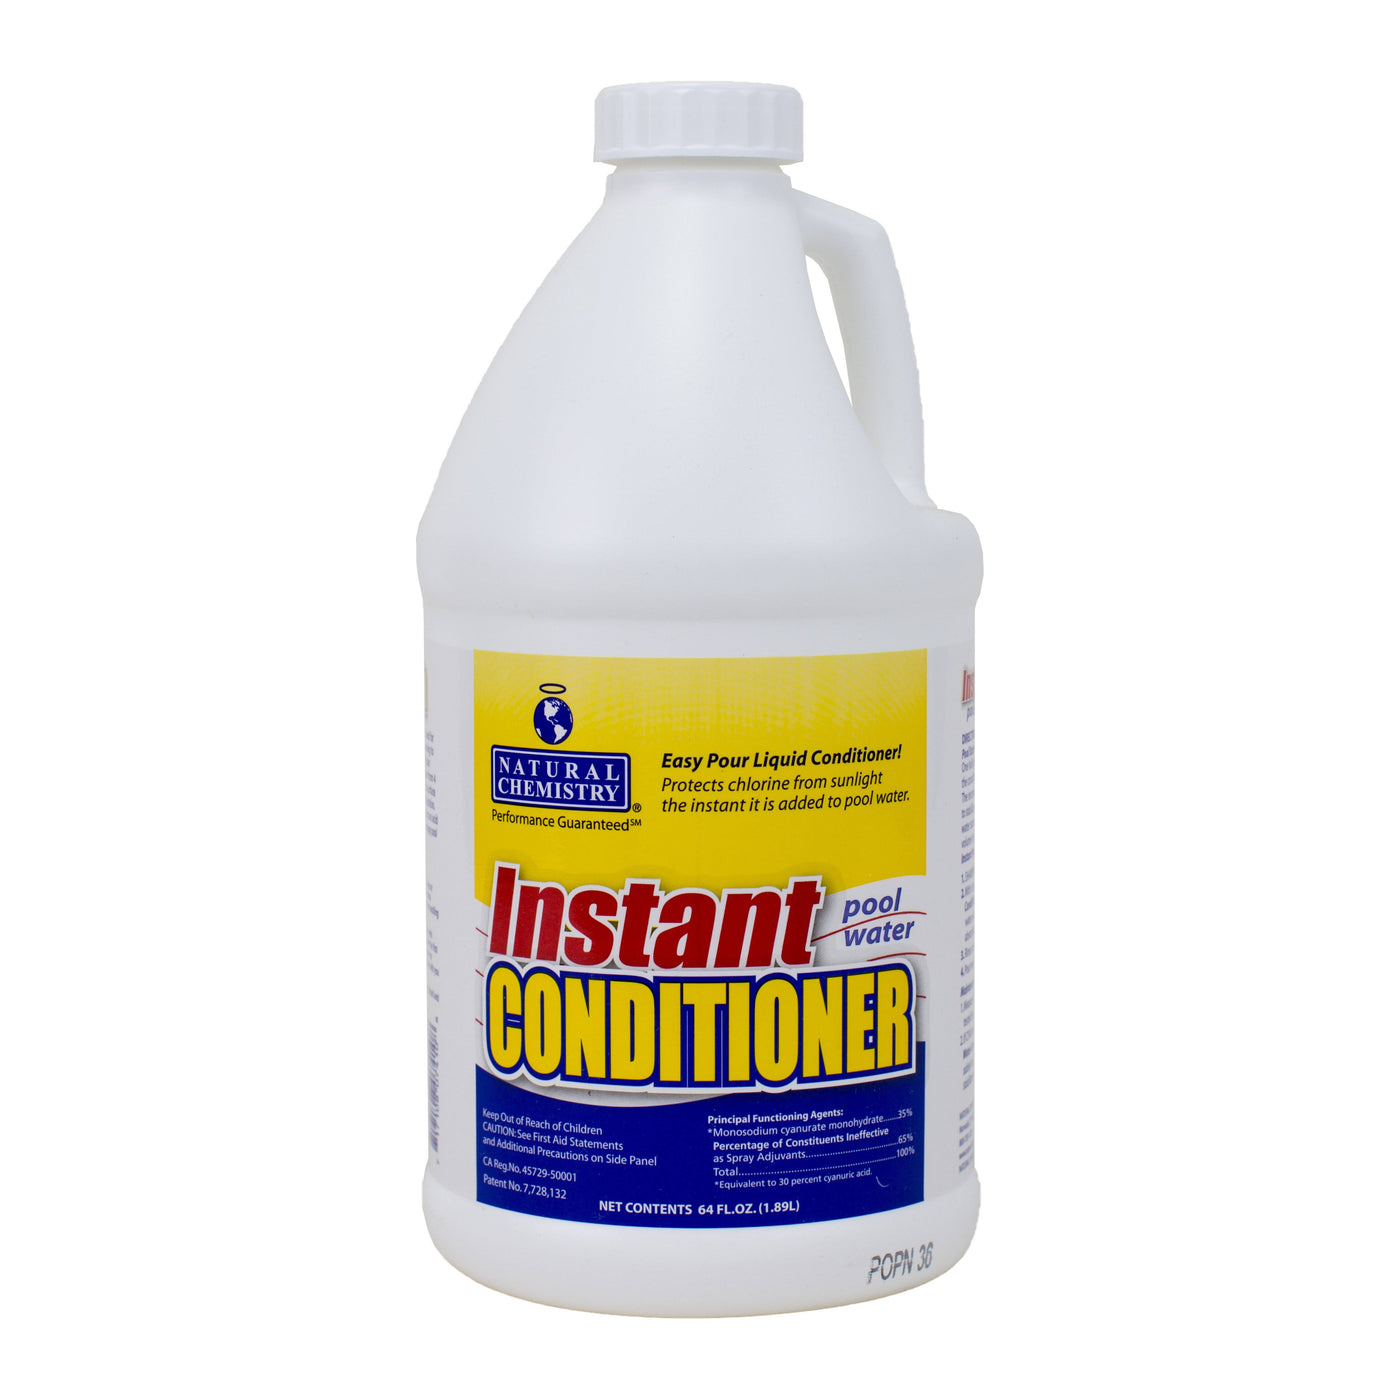 Natural Chemistry Instant Conditioner, 1 Gallon Liquid Swimming Pool Stabilizer and Conditioner